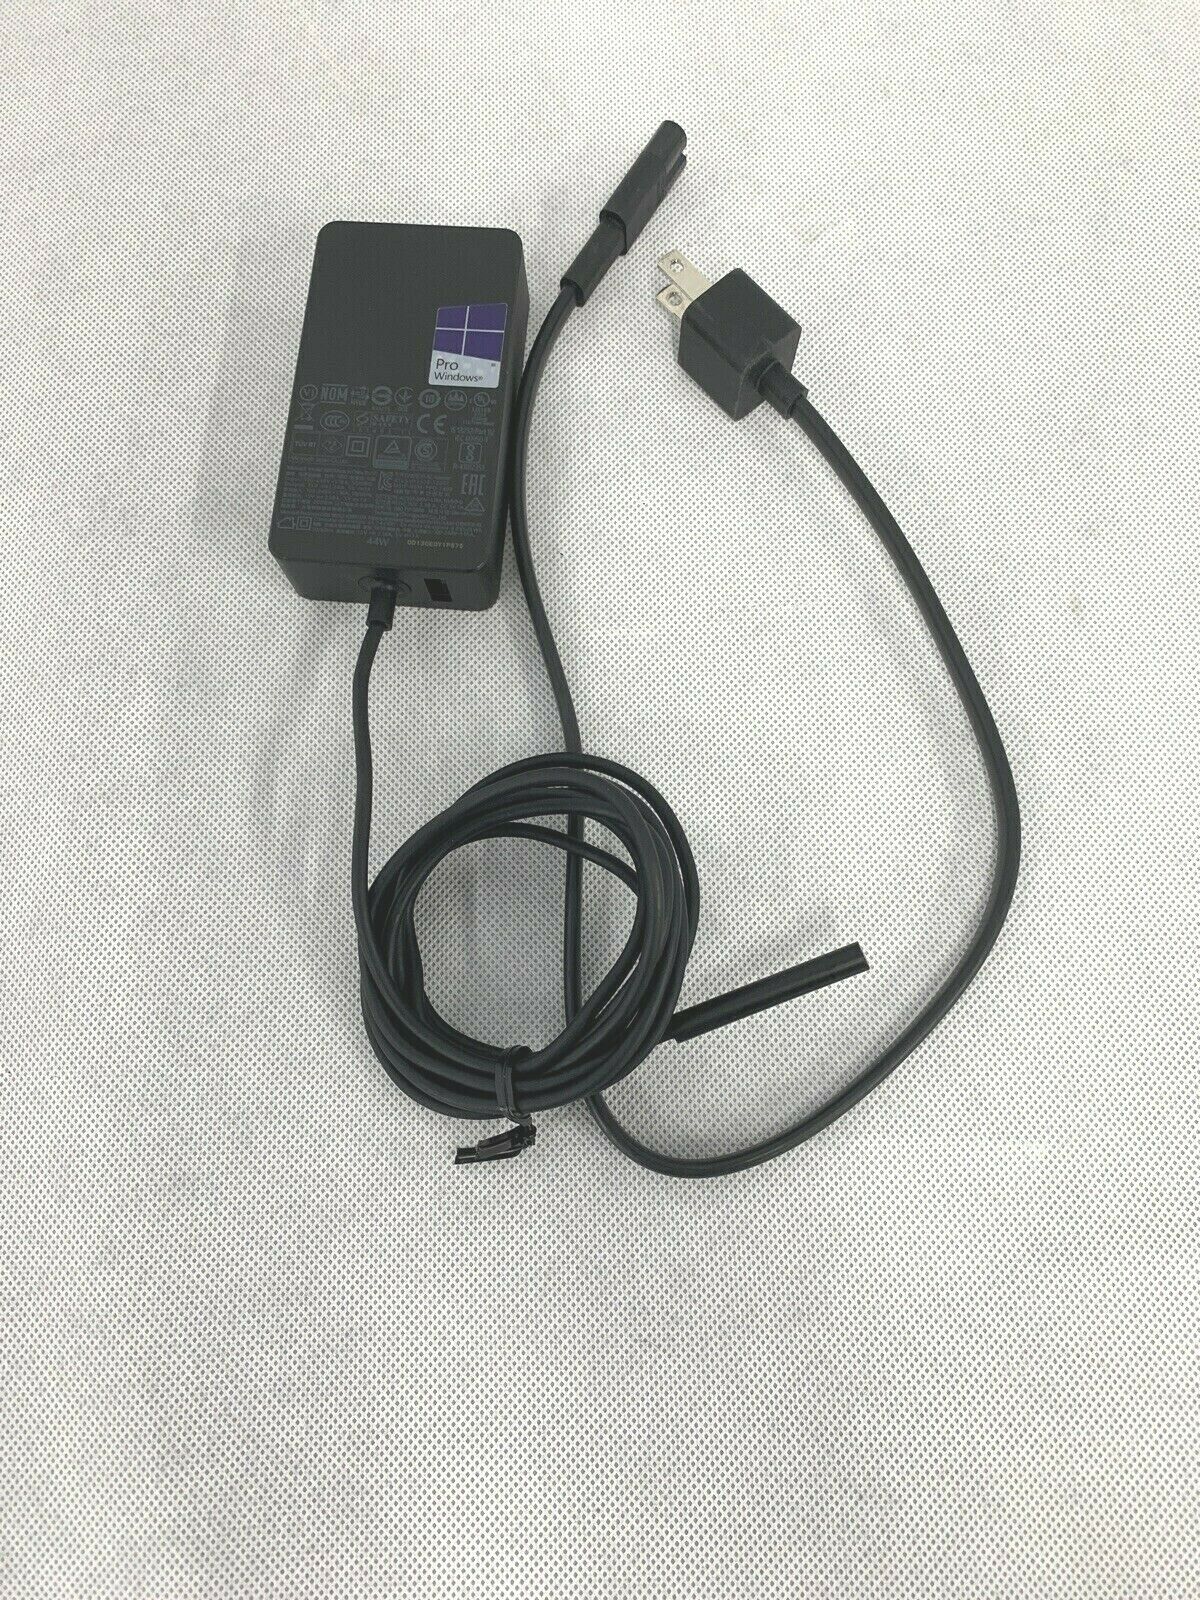 Genuine Microsoft Surface Pro 3 4 5 6 Charger Model 1800 15V 44W Compatible Brand: For Microsoft